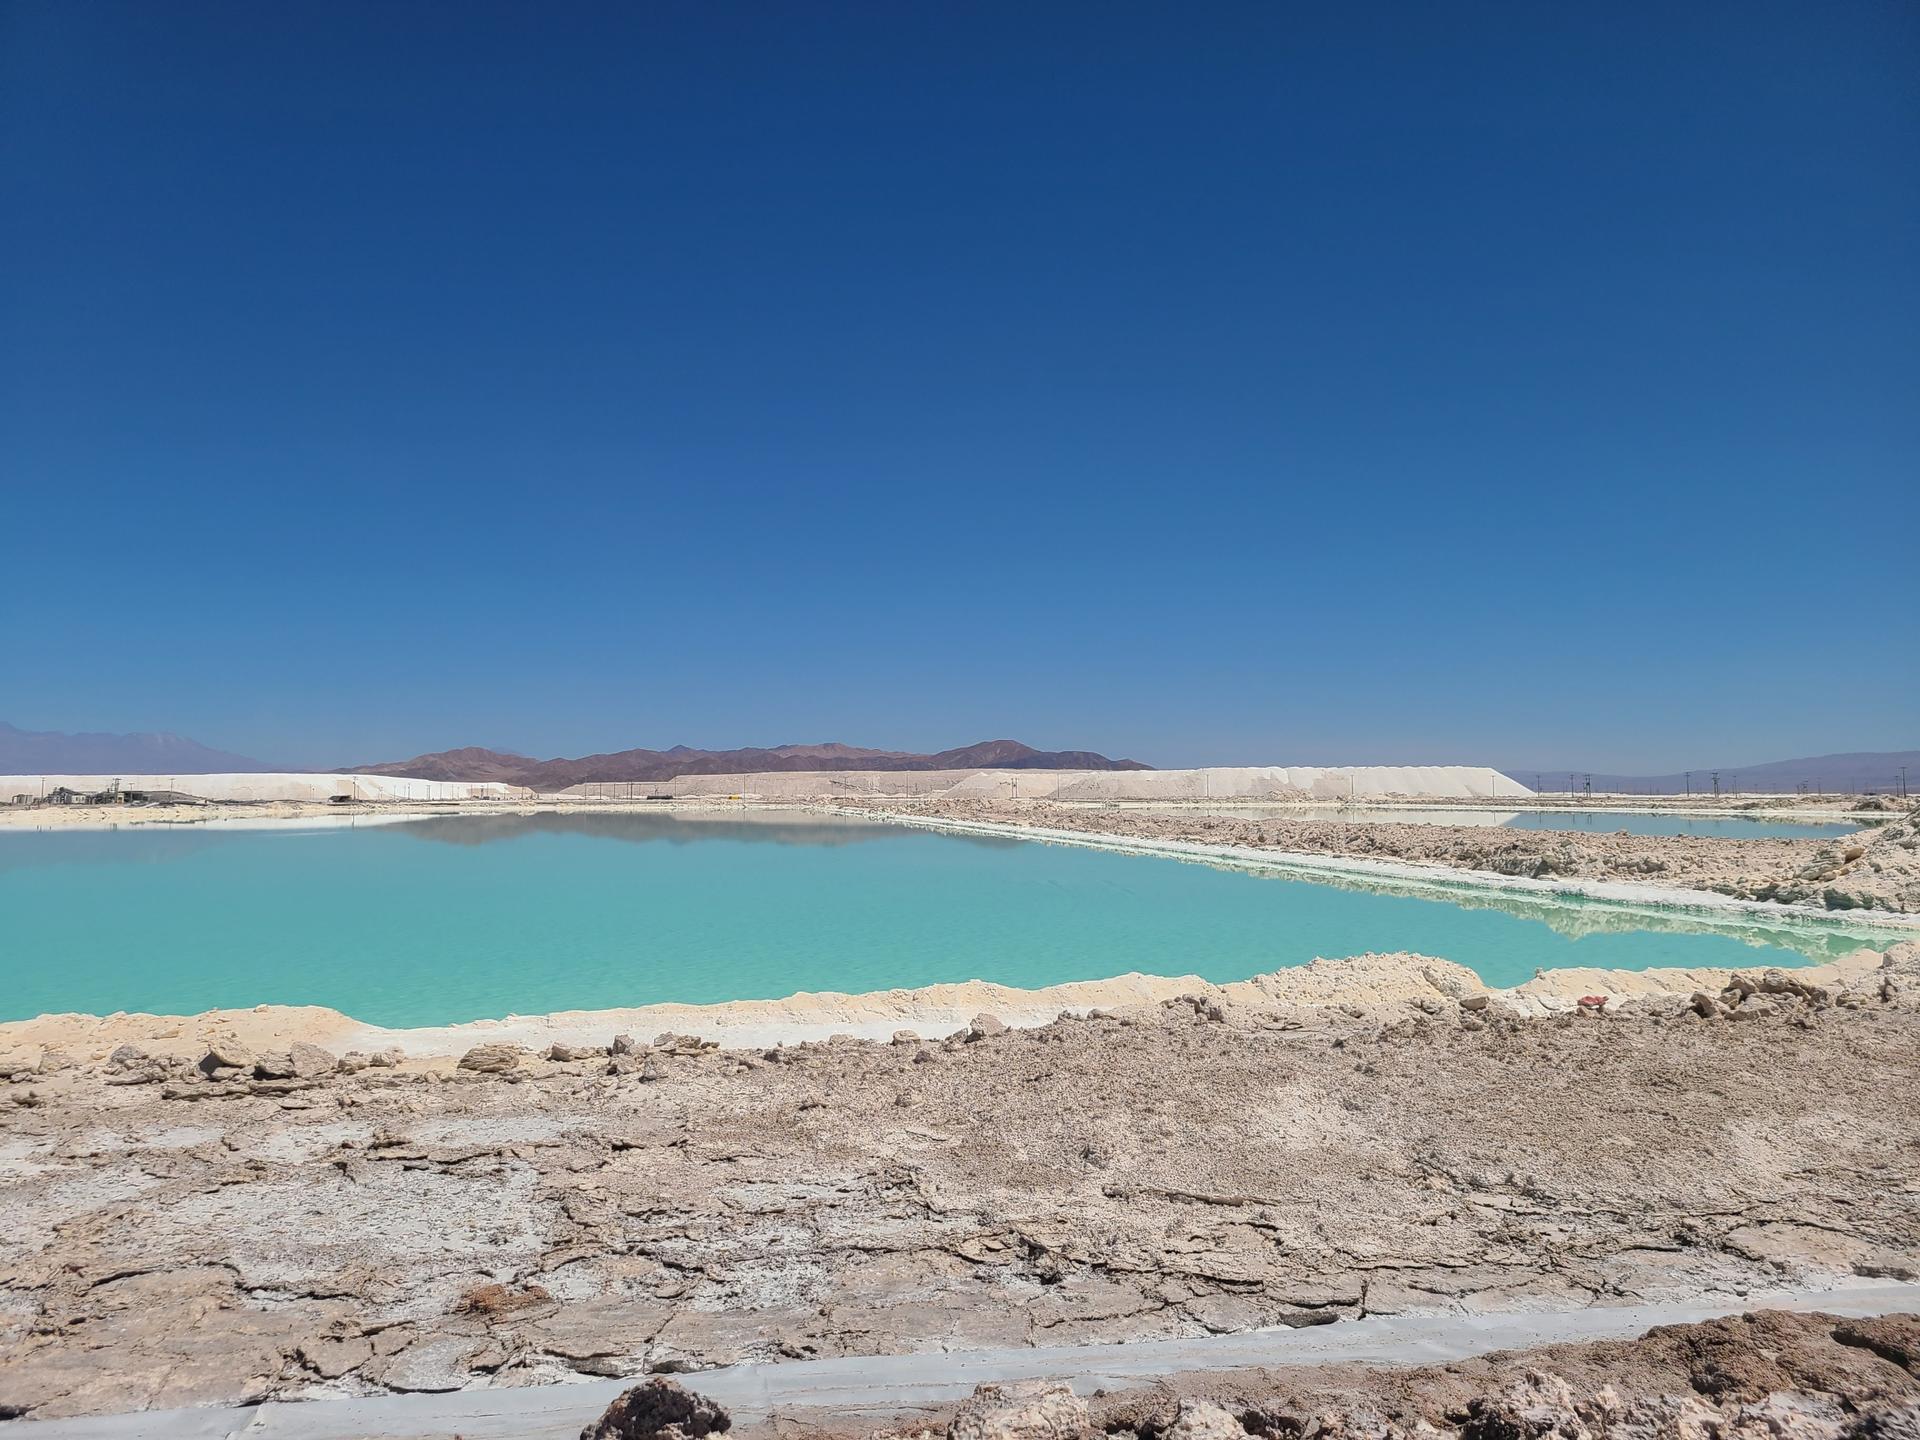 Indigenous people in Chile are concerned that the amount of water used in lithium operations is threatening desert irrigation and farming methods they have relied on for centuries.